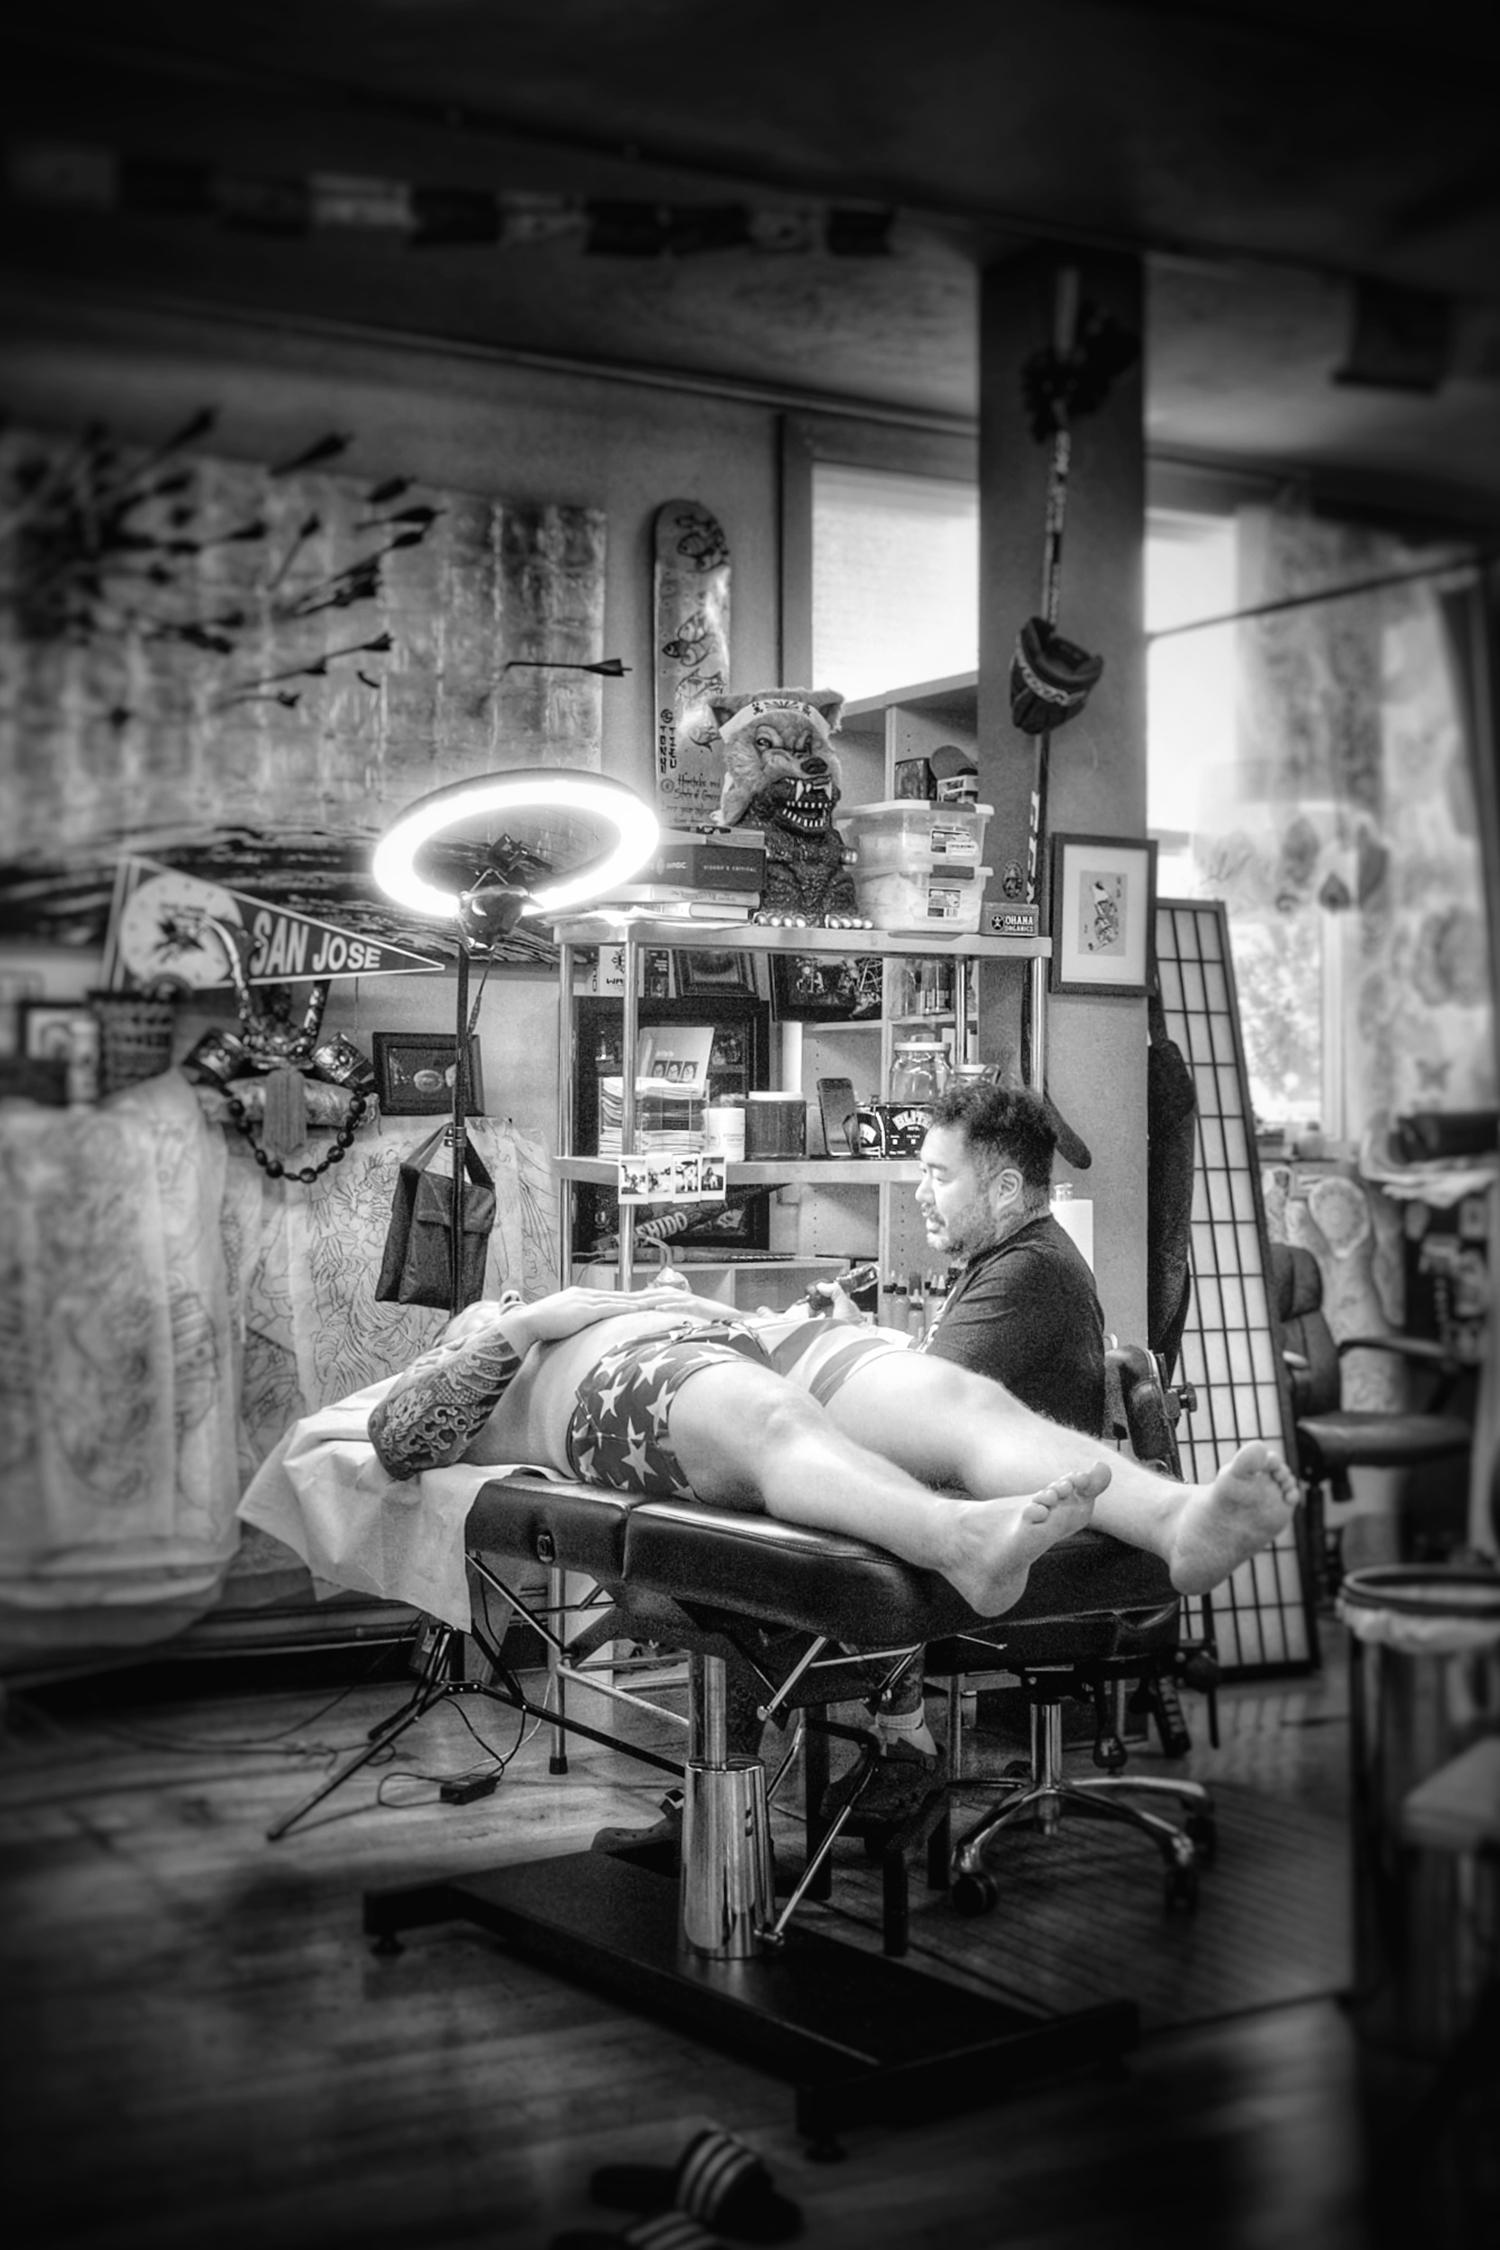 Connection with the customer is crucial to the tattooing process